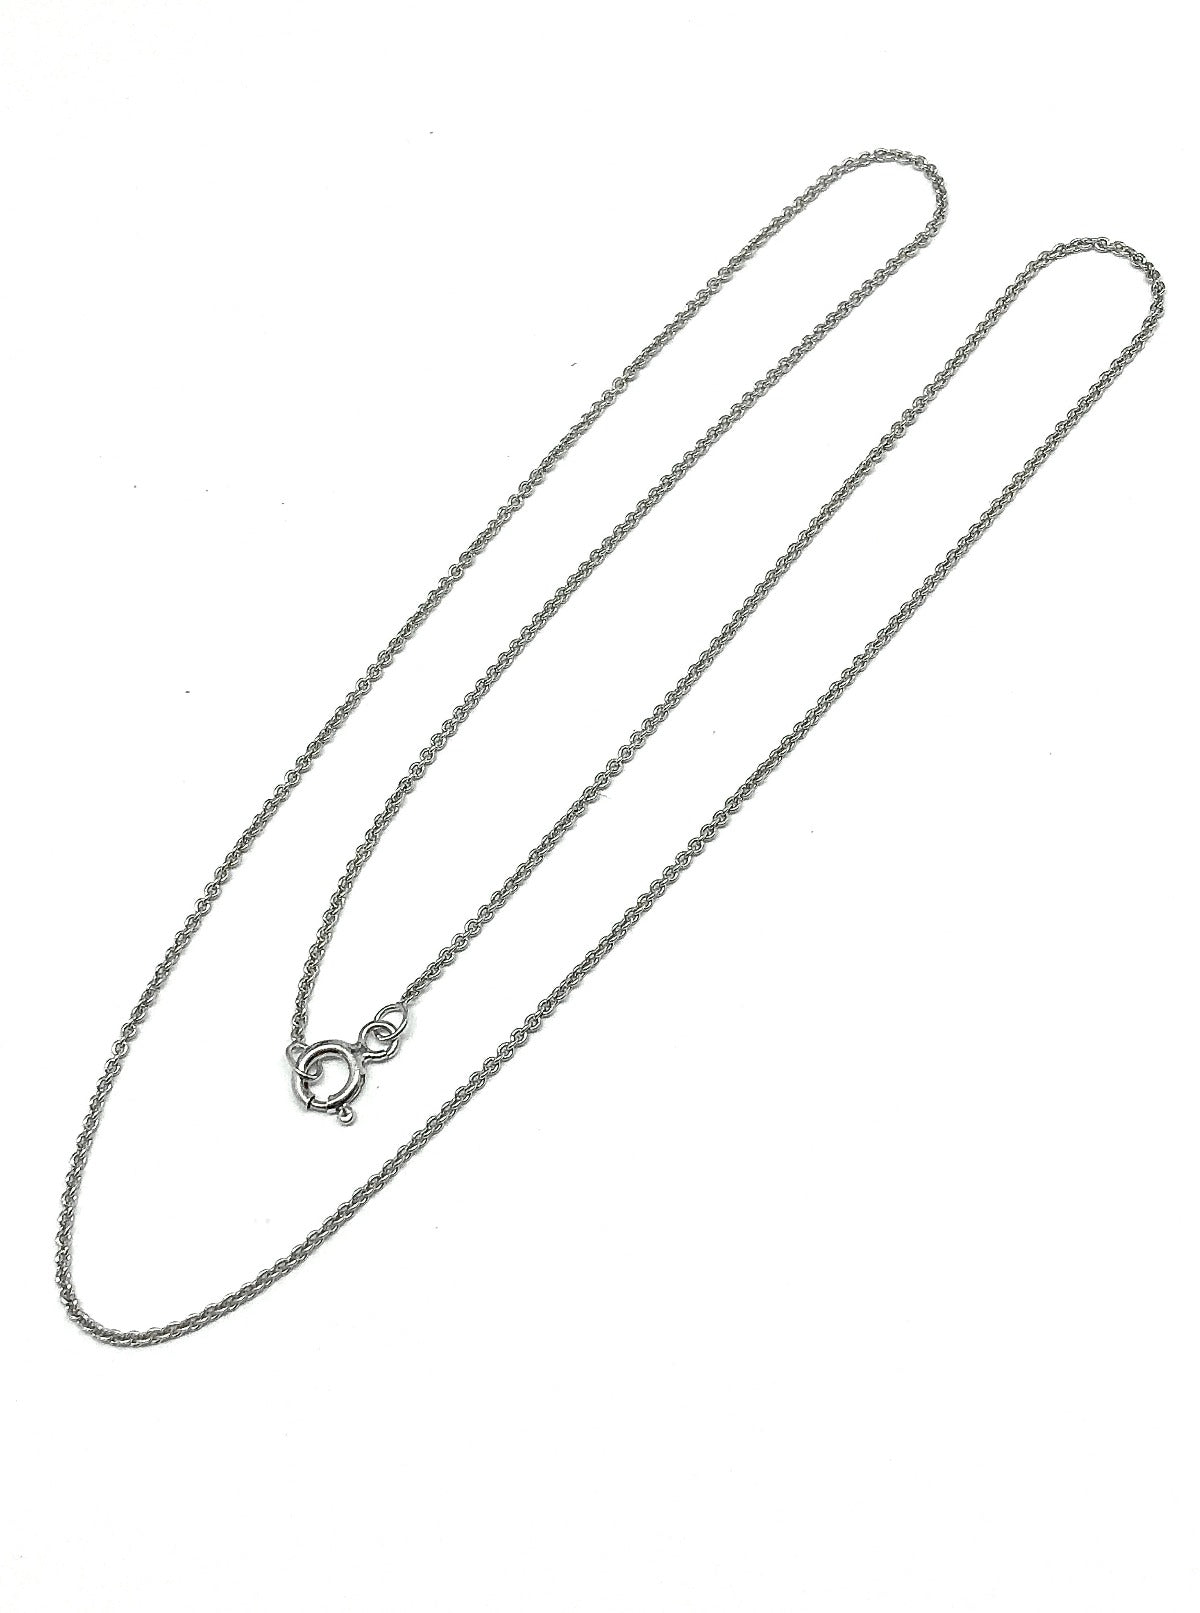 Blingschlingers - Sterling Silver Slim Cable Link Style Chain Necklace